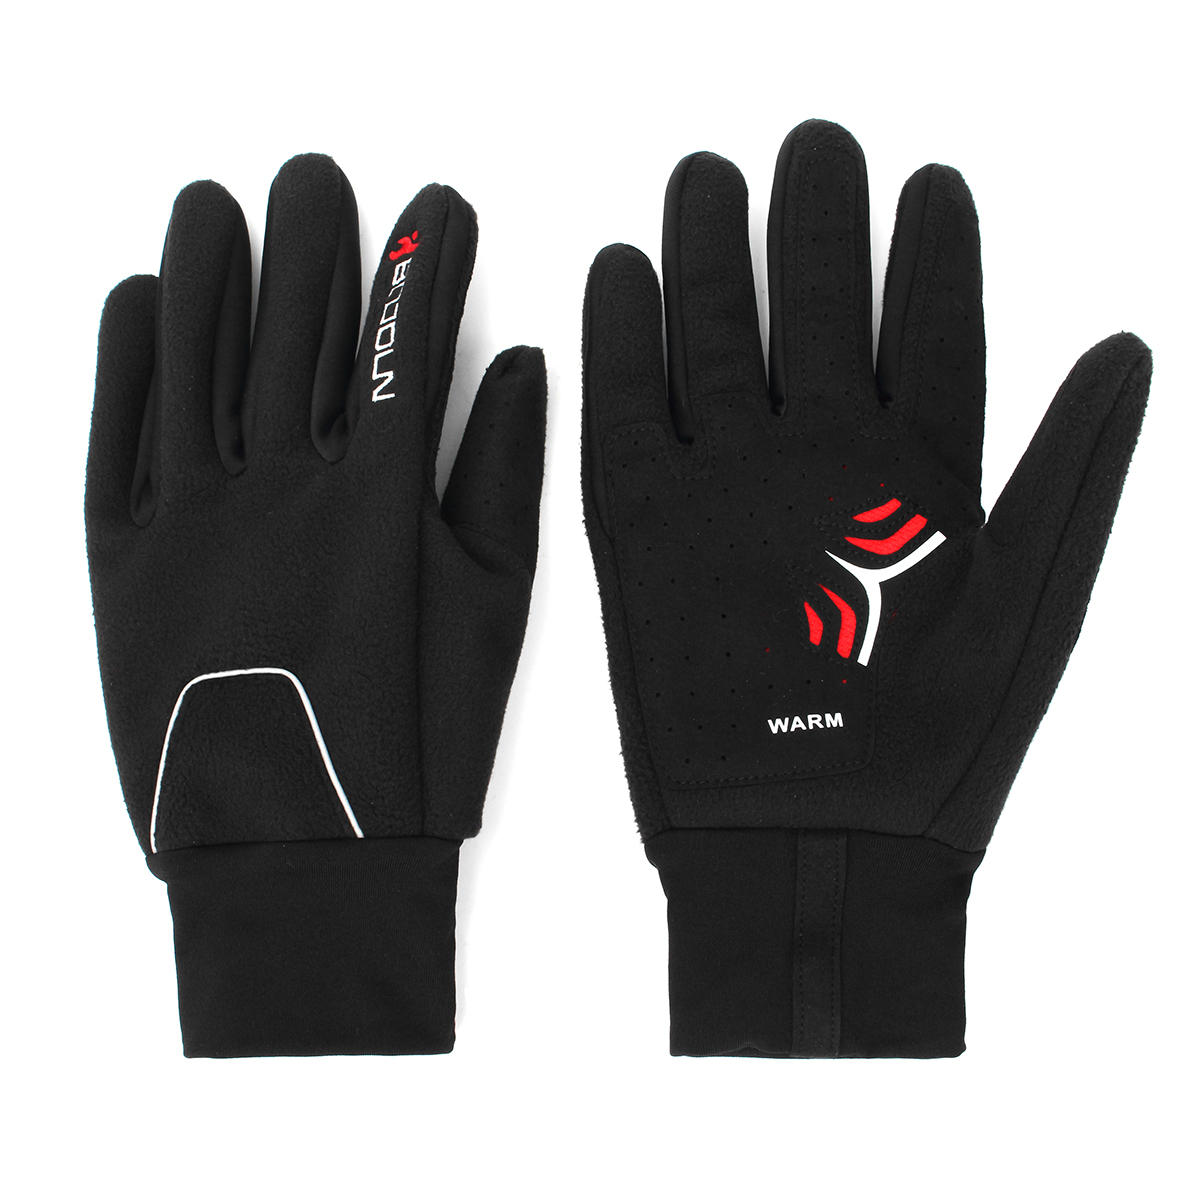 Motorcycle Gloves Winter Warm Waterproof Windproof Protective Gloves For BOODUN